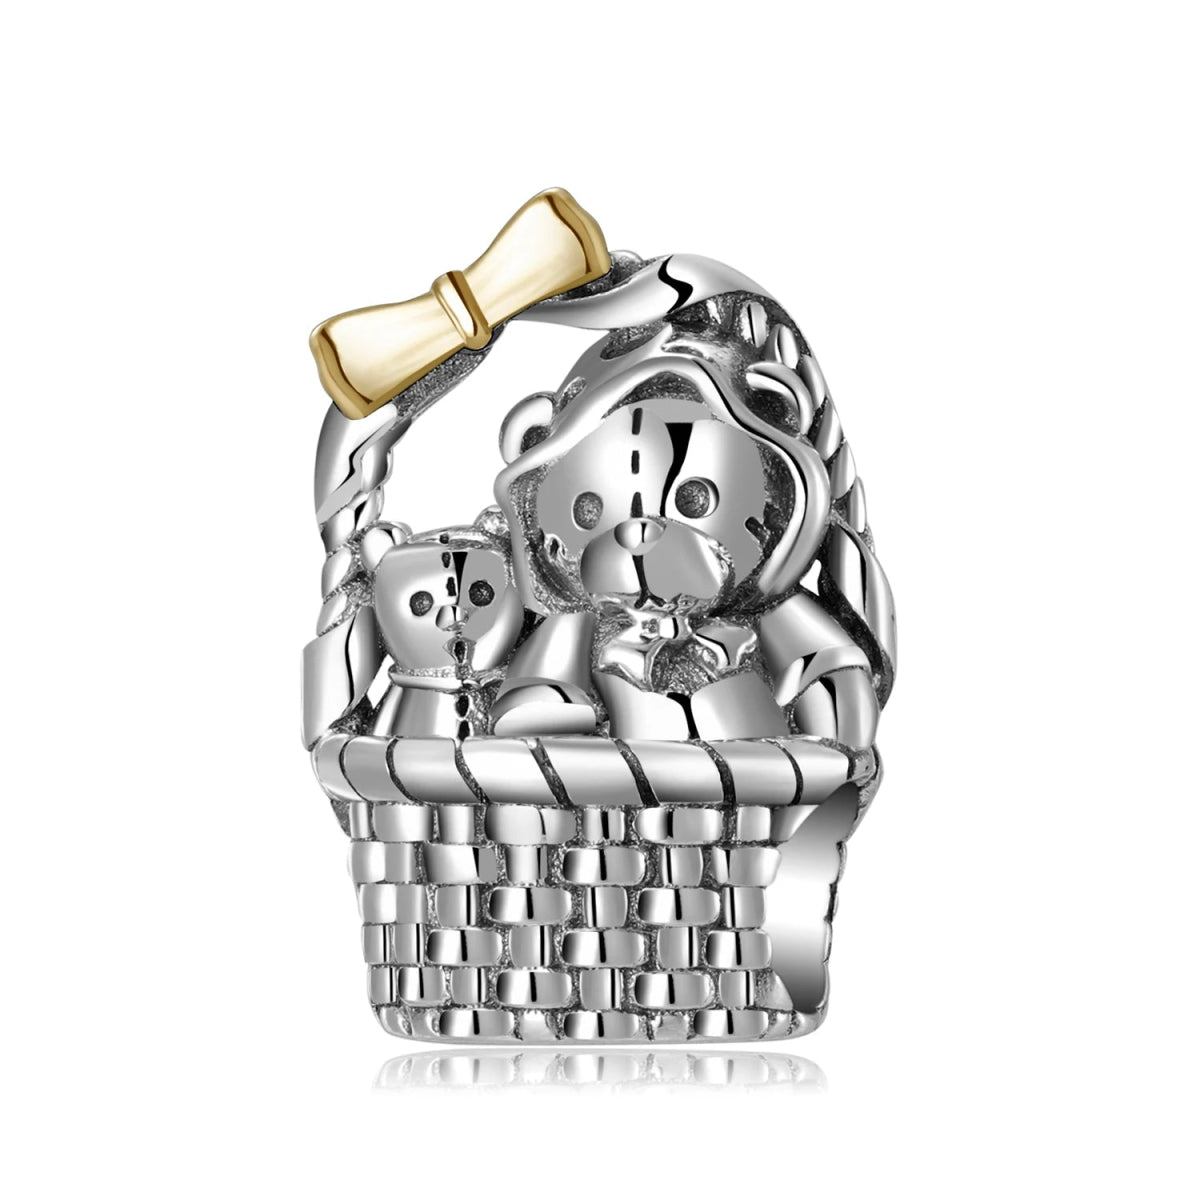 Gold/Silver Bear Charms - Uniquely You Online - Charms